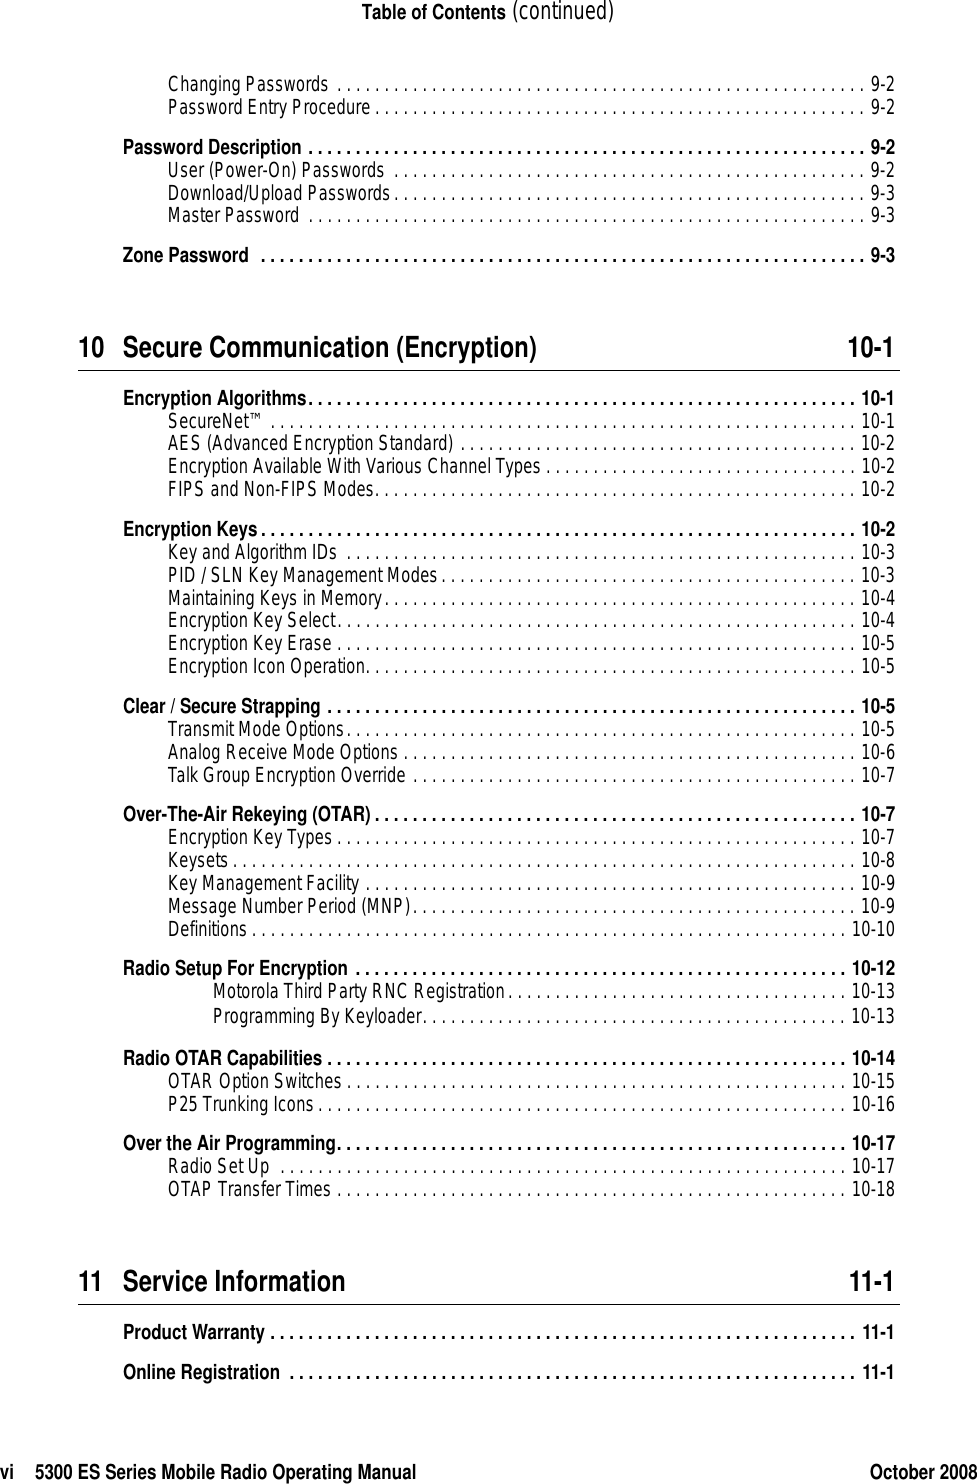 vi 5300 ES Series Mobile Radio Operating Manual October 2008Table of Contents (continued)Changing Passwords . . . . . . . . . . . . . . . . . . . . . . . . . . . . . . . . . . . . . . . . . . . . . . . . . . . . . . . . 9-2Password Entry Procedure. . . . . . . . . . . . . . . . . . . . . . . . . . . . . . . . . . . . . . . . . . . . . . . . . . . . 9-2Password Description . . . . . . . . . . . . . . . . . . . . . . . . . . . . . . . . . . . . . . . . . . . . . . . . . . . . . . . . . . . 9-2User (Power-On) Passwords . . . . . . . . . . . . . . . . . . . . . . . . . . . . . . . . . . . . . . . . . . . . . . . . . . 9-2Download/Upload Passwords. . . . . . . . . . . . . . . . . . . . . . . . . . . . . . . . . . . . . . . . . . . . . . . . . . 9-3Master Password . . . . . . . . . . . . . . . . . . . . . . . . . . . . . . . . . . . . . . . . . . . . . . . . . . . . . . . . . . . 9-3Zone Password  . . . . . . . . . . . . . . . . . . . . . . . . . . . . . . . . . . . . . . . . . . . . . . . . . . . . . . . . . . . . . . . . 9-310 Secure Communication (Encryption) 10-1Encryption Algorithms. . . . . . . . . . . . . . . . . . . . . . . . . . . . . . . . . . . . . . . . . . . . . . . . . . . . . . . . . . 10-1SecureNet™ . . . . . . . . . . . . . . . . . . . . . . . . . . . . . . . . . . . . . . . . . . . . . . . . . . . . . . . . . . . . . . 10-1AES (Advanced Encryption Standard) . . . . . . . . . . . . . . . . . . . . . . . . . . . . . . . . . . . . . . . . . . 10-2Encryption Available With Various Channel Types . . . . . . . . . . . . . . . . . . . . . . . . . . . . . . . . . 10-2FIPS and Non-FIPS Modes. . . . . . . . . . . . . . . . . . . . . . . . . . . . . . . . . . . . . . . . . . . . . . . . . . . 10-2Encryption Keys. . . . . . . . . . . . . . . . . . . . . . . . . . . . . . . . . . . . . . . . . . . . . . . . . . . . . . . . . . . . . . . 10-2Key and Algorithm IDs . . . . . . . . . . . . . . . . . . . . . . . . . . . . . . . . . . . . . . . . . . . . . . . . . . . . . . 10-3PID / SLN Key Management Modes. . . . . . . . . . . . . . . . . . . . . . . . . . . . . . . . . . . . . . . . . . . . 10-3Maintaining Keys in Memory. . . . . . . . . . . . . . . . . . . . . . . . . . . . . . . . . . . . . . . . . . . . . . . . . . 10-4Encryption Key Select. . . . . . . . . . . . . . . . . . . . . . . . . . . . . . . . . . . . . . . . . . . . . . . . . . . . . . . 10-4Encryption Key Erase . . . . . . . . . . . . . . . . . . . . . . . . . . . . . . . . . . . . . . . . . . . . . . . . . . . . . . . 10-5Encryption Icon Operation. . . . . . . . . . . . . . . . . . . . . . . . . . . . . . . . . . . . . . . . . . . . . . . . . . . . 10-5Clear / Secure Strapping . . . . . . . . . . . . . . . . . . . . . . . . . . . . . . . . . . . . . . . . . . . . . . . . . . . . . . . . 10-5Transmit Mode Options. . . . . . . . . . . . . . . . . . . . . . . . . . . . . . . . . . . . . . . . . . . . . . . . . . . . . . 10-5Analog Receive Mode Options . . . . . . . . . . . . . . . . . . . . . . . . . . . . . . . . . . . . . . . . . . . . . . . . 10-6Talk Group Encryption Override . . . . . . . . . . . . . . . . . . . . . . . . . . . . . . . . . . . . . . . . . . . . . . . 10-7Over-The-Air Rekeying (OTAR) . . . . . . . . . . . . . . . . . . . . . . . . . . . . . . . . . . . . . . . . . . . . . . . . . . . 10-7Encryption Key Types . . . . . . . . . . . . . . . . . . . . . . . . . . . . . . . . . . . . . . . . . . . . . . . . . . . . . . . 10-7Keysets. . . . . . . . . . . . . . . . . . . . . . . . . . . . . . . . . . . . . . . . . . . . . . . . . . . . . . . . . . . . . . . . . . 10-8Key Management Facility . . . . . . . . . . . . . . . . . . . . . . . . . . . . . . . . . . . . . . . . . . . . . . . . . . . . 10-9Message Number Period (MNP). . . . . . . . . . . . . . . . . . . . . . . . . . . . . . . . . . . . . . . . . . . . . . . 10-9Definitions. . . . . . . . . . . . . . . . . . . . . . . . . . . . . . . . . . . . . . . . . . . . . . . . . . . . . . . . . . . . . . . 10-10Radio Setup For Encryption . . . . . . . . . . . . . . . . . . . . . . . . . . . . . . . . . . . . . . . . . . . . . . . . . . . . 10-12Motorola Third Party RNC Registration. . . . . . . . . . . . . . . . . . . . . . . . . . . . . . . . . . . . 10-13Programming By Keyloader. . . . . . . . . . . . . . . . . . . . . . . . . . . . . . . . . . . . . . . . . . . . . 10-13Radio OTAR Capabilities . . . . . . . . . . . . . . . . . . . . . . . . . . . . . . . . . . . . . . . . . . . . . . . . . . . . . . . 10-14OTAR Option Switches . . . . . . . . . . . . . . . . . . . . . . . . . . . . . . . . . . . . . . . . . . . . . . . . . . . . . 10-15P25 Trunking Icons. . . . . . . . . . . . . . . . . . . . . . . . . . . . . . . . . . . . . . . . . . . . . . . . . . . . . . . . 10-16Over the Air Programming. . . . . . . . . . . . . . . . . . . . . . . . . . . . . . . . . . . . . . . . . . . . . . . . . . . . . . 10-17Radio Set Up  . . . . . . . . . . . . . . . . . . . . . . . . . . . . . . . . . . . . . . . . . . . . . . . . . . . . . . . . . . . . 10-17OTAP Transfer Times . . . . . . . . . . . . . . . . . . . . . . . . . . . . . . . . . . . . . . . . . . . . . . . . . . . . . . 10-1811 Service Information 11-1Product Warranty . . . . . . . . . . . . . . . . . . . . . . . . . . . . . . . . . . . . . . . . . . . . . . . . . . . . . . . . . . . . . . 11-1Online Registration  . . . . . . . . . . . . . . . . . . . . . . . . . . . . . . . . . . . . . . . . . . . . . . . . . . . . . . . . . . . . 11-1